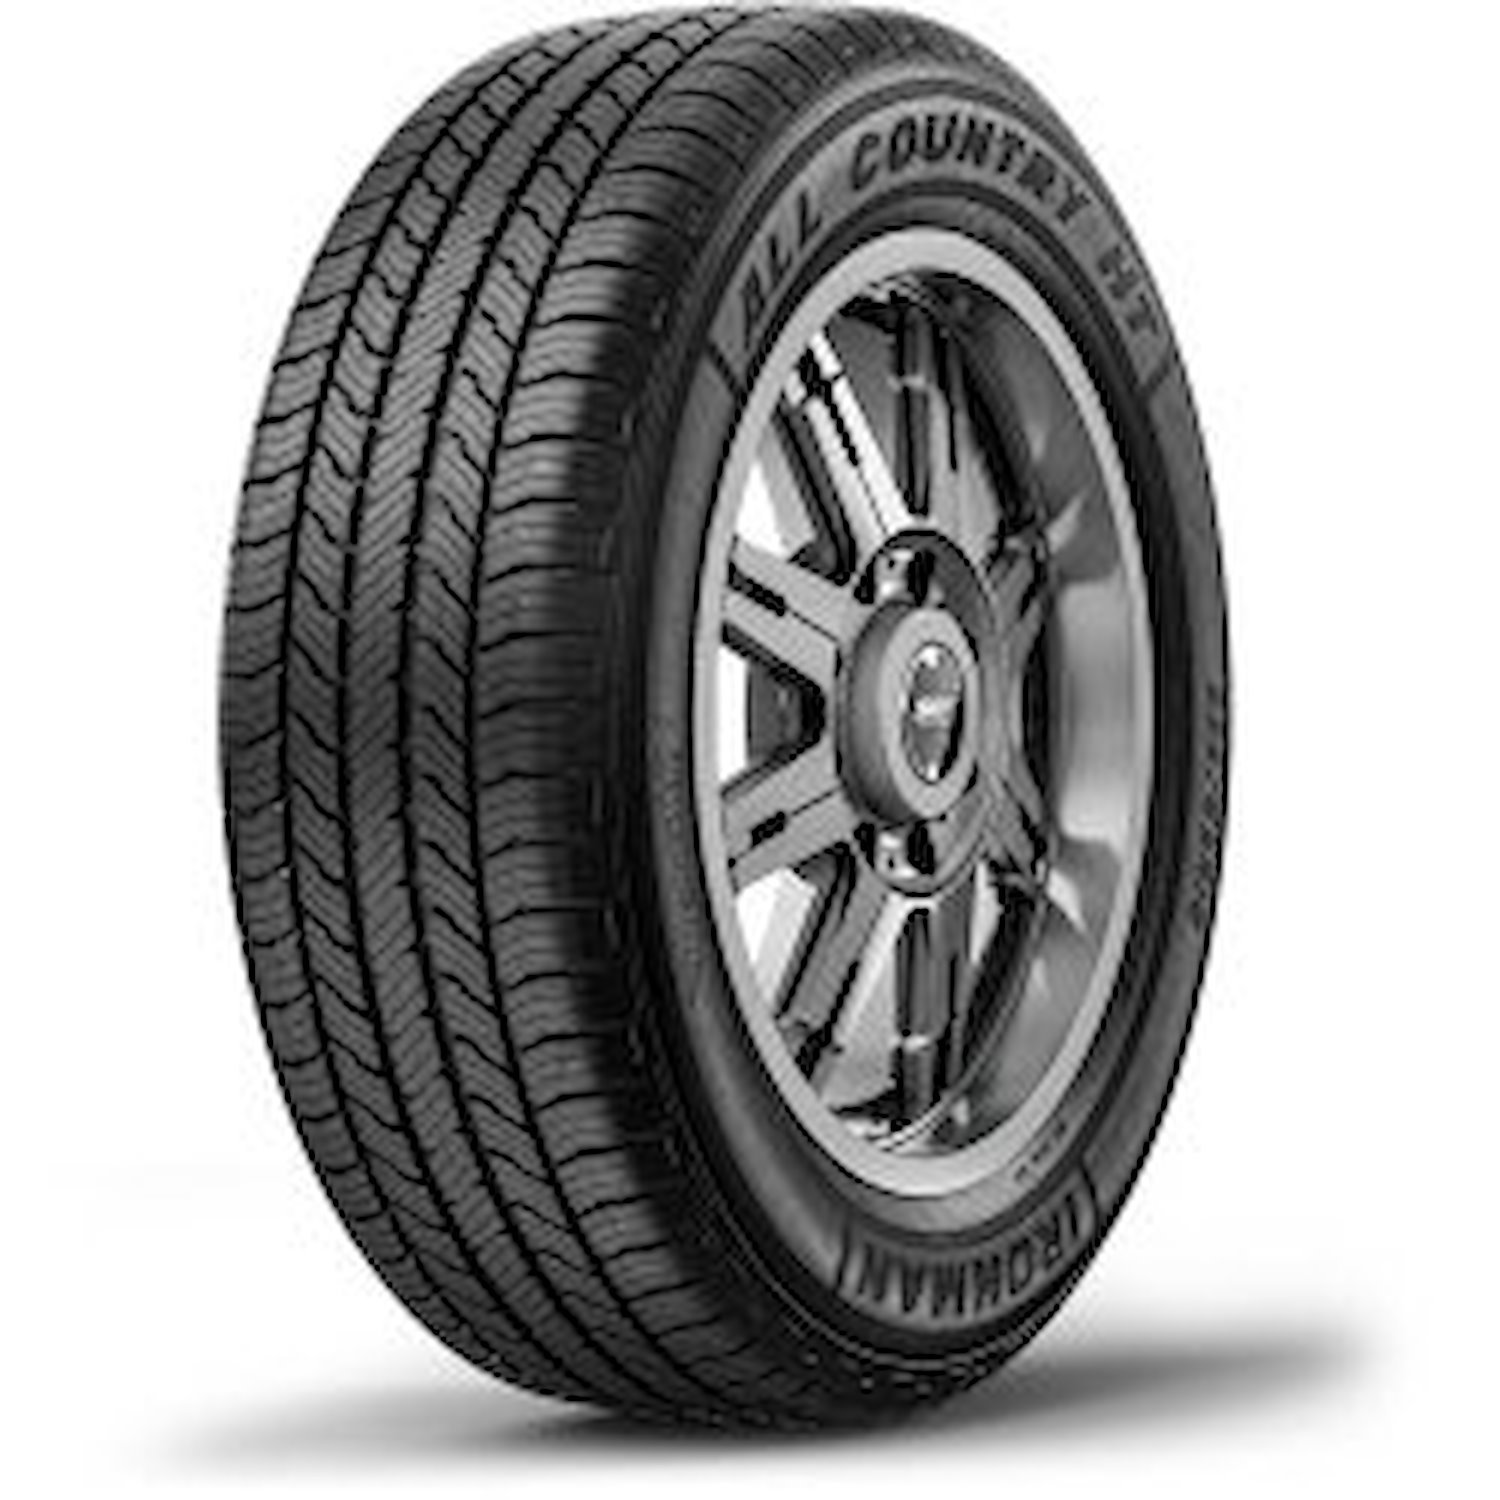 03080 All Country HT Tire, 265/70R17, 115T